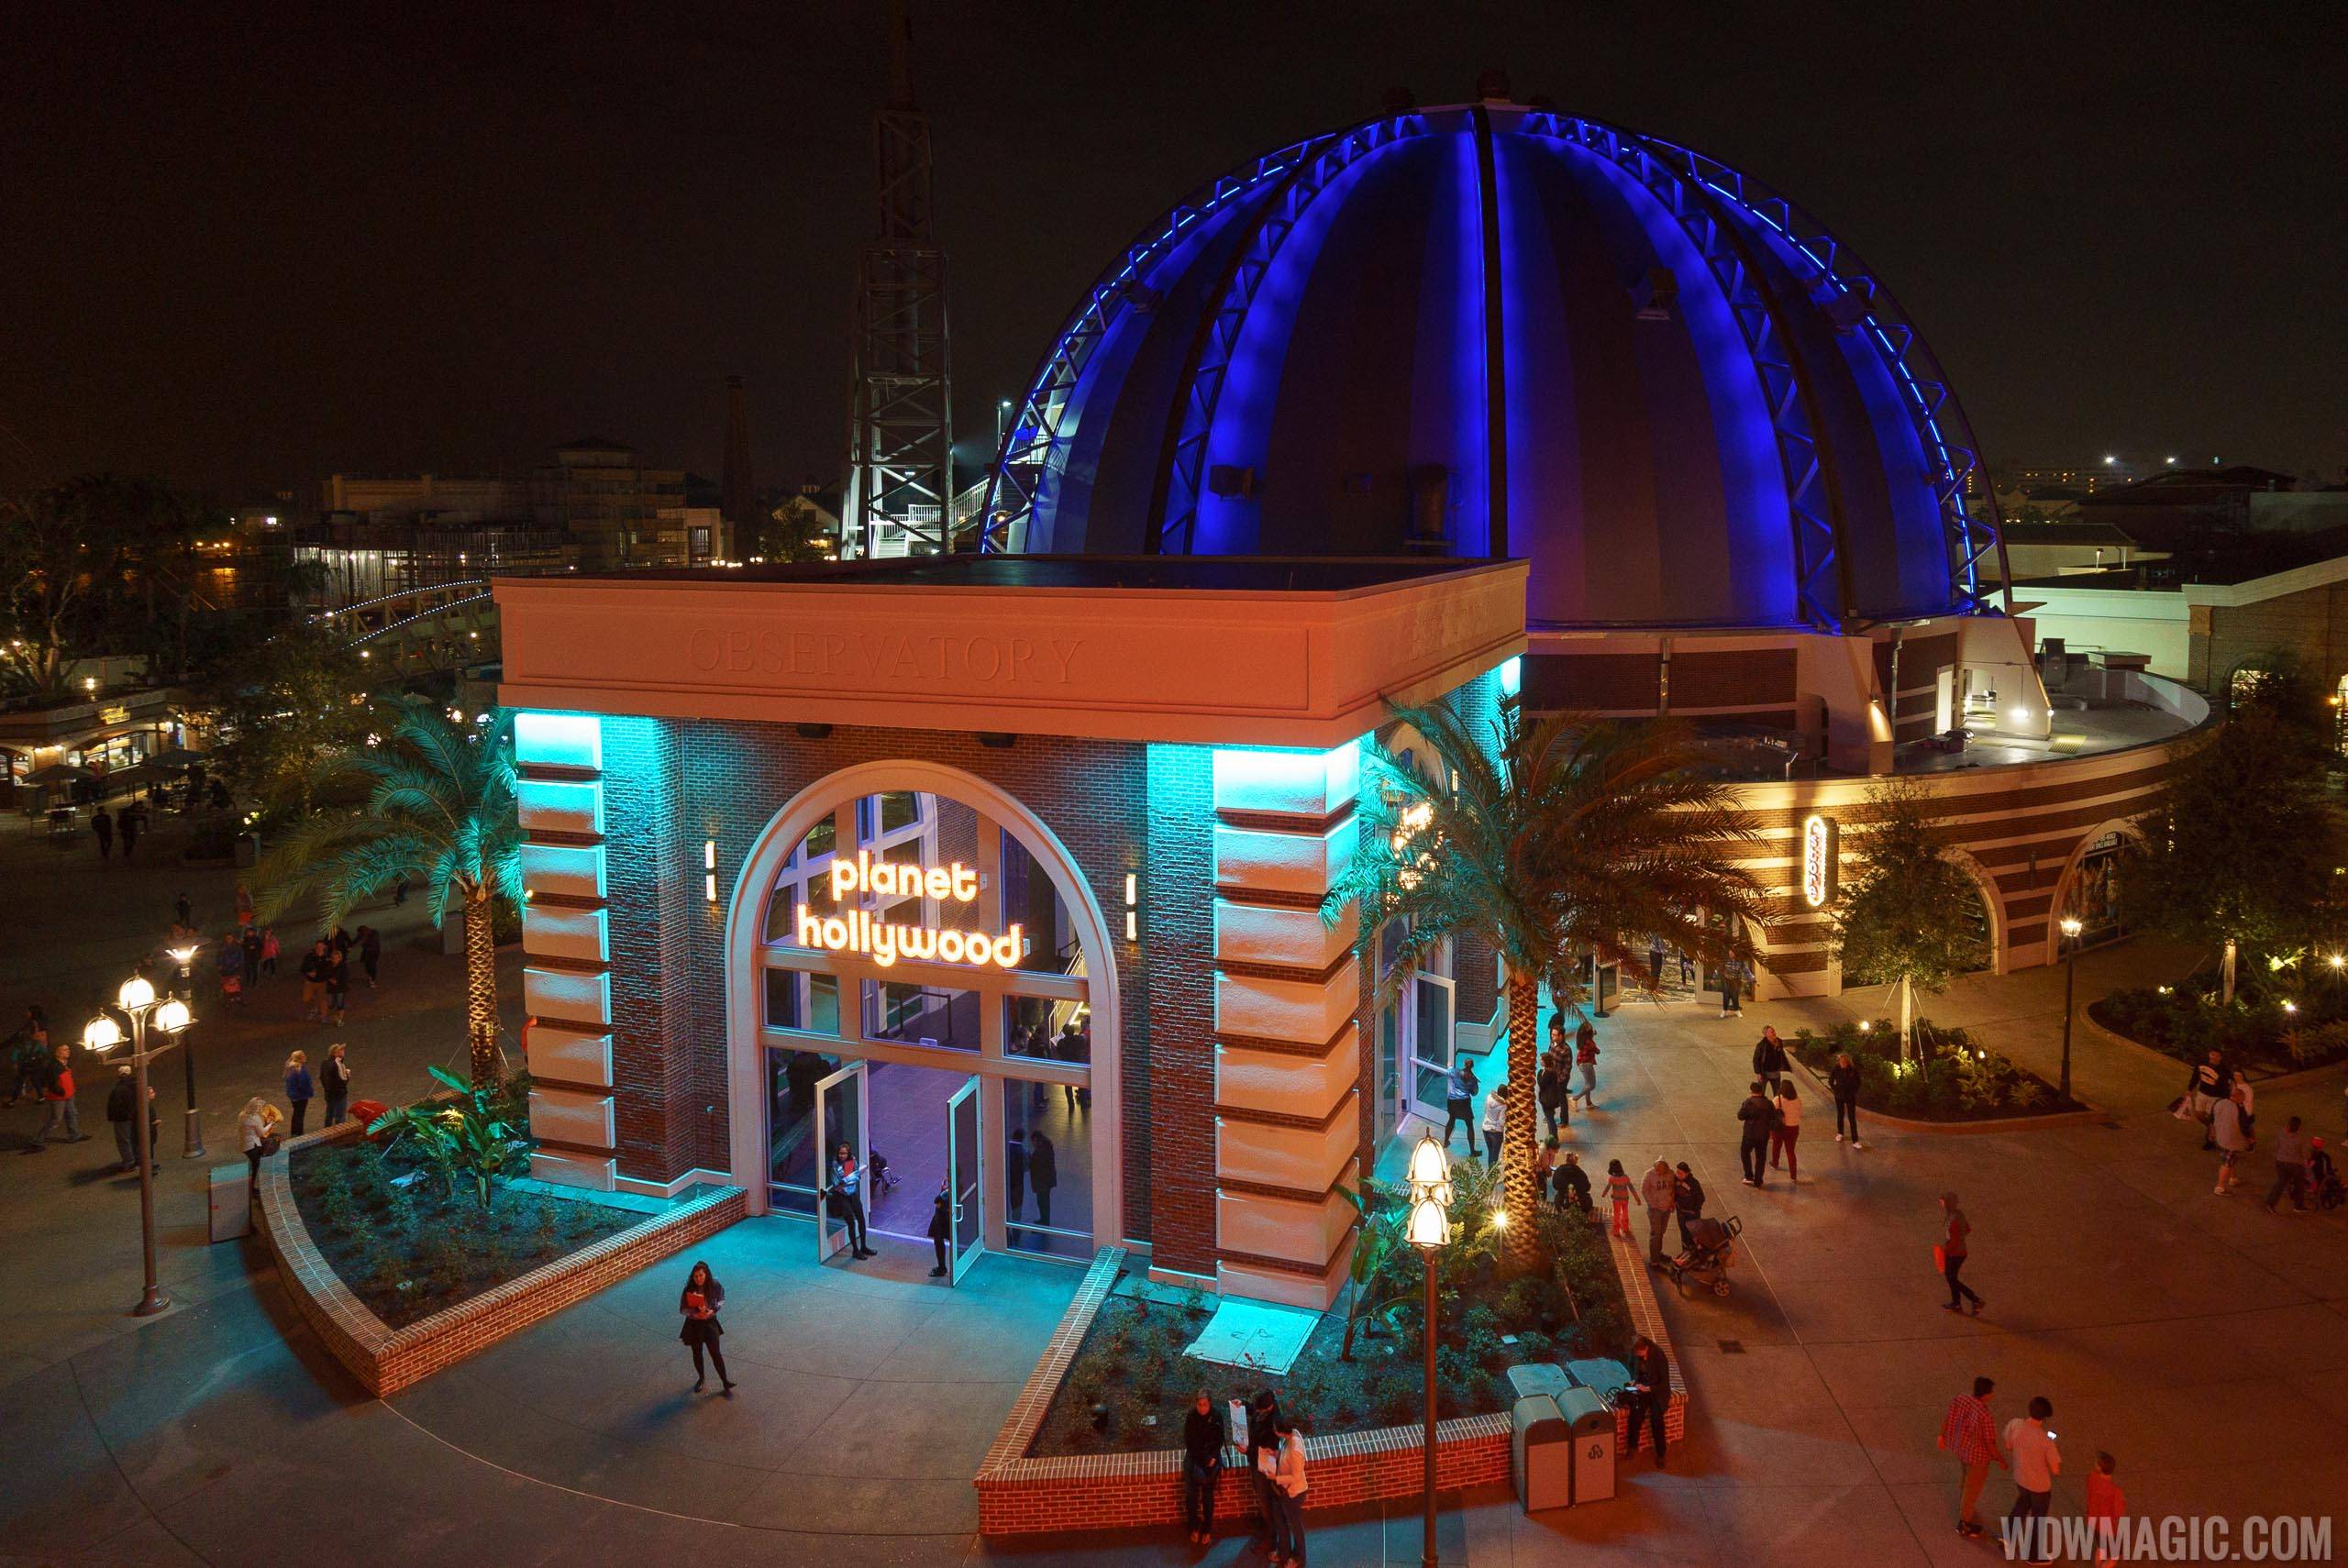 Planet Hollywood operating hours changed